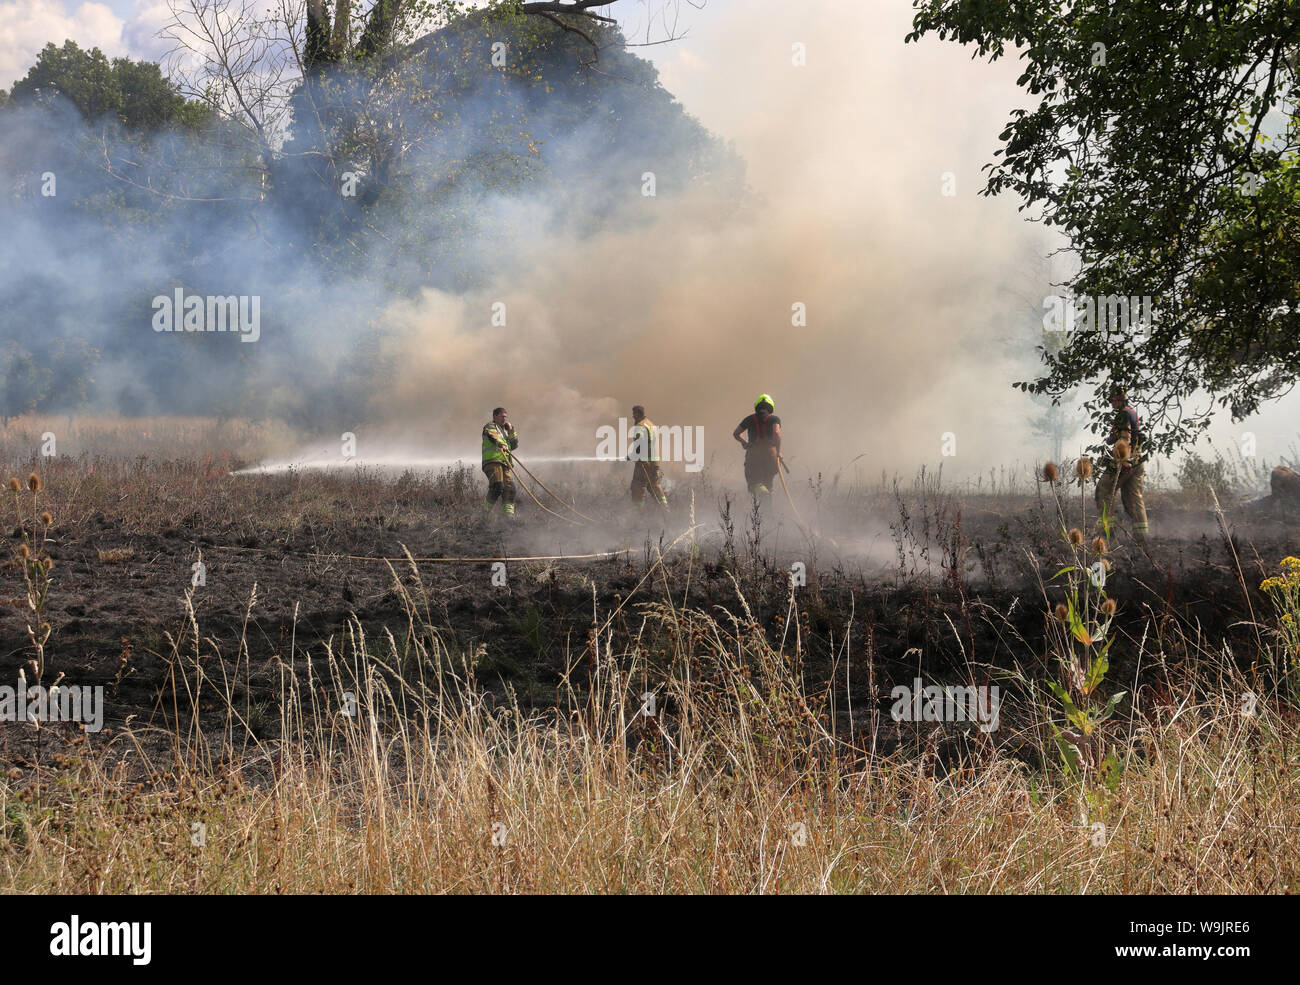 Firefighters at work tackling a field fire and pulling a hosepipe Stock Photo